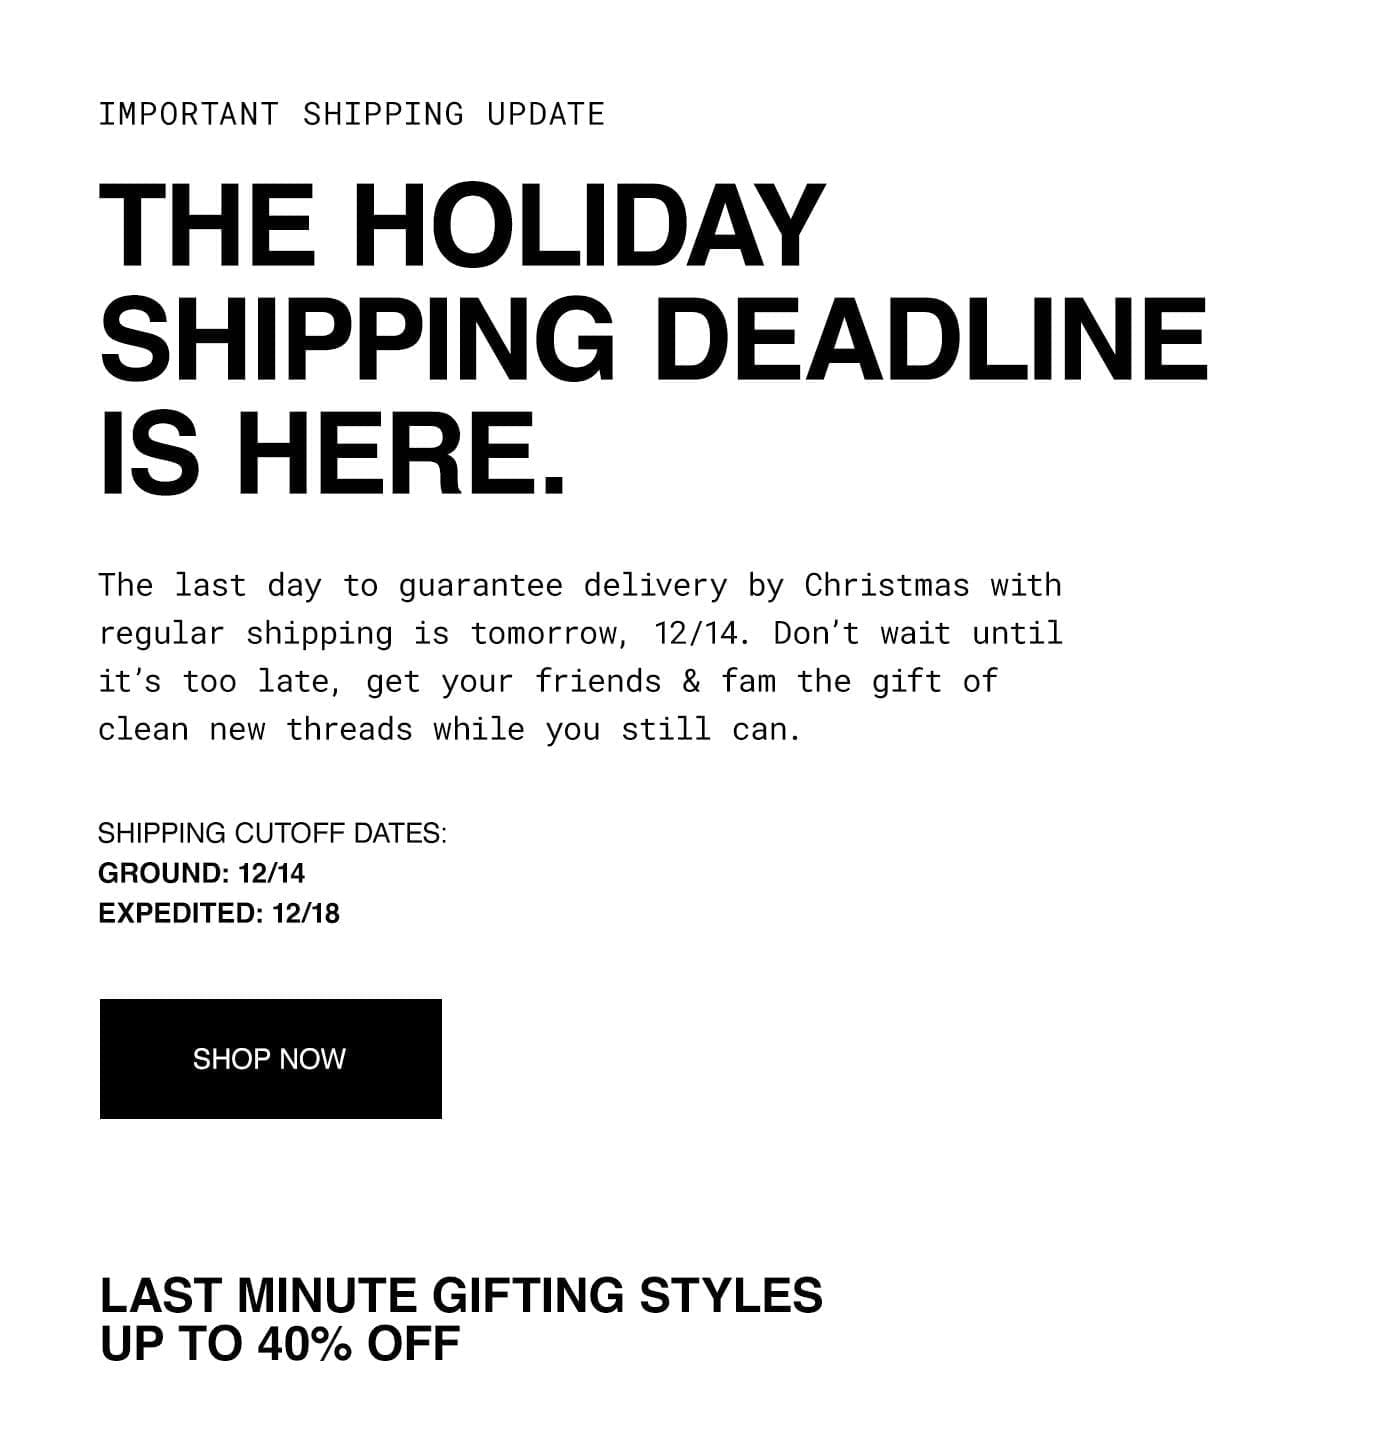 The Holiday Shipping Deadline is Tomorrow